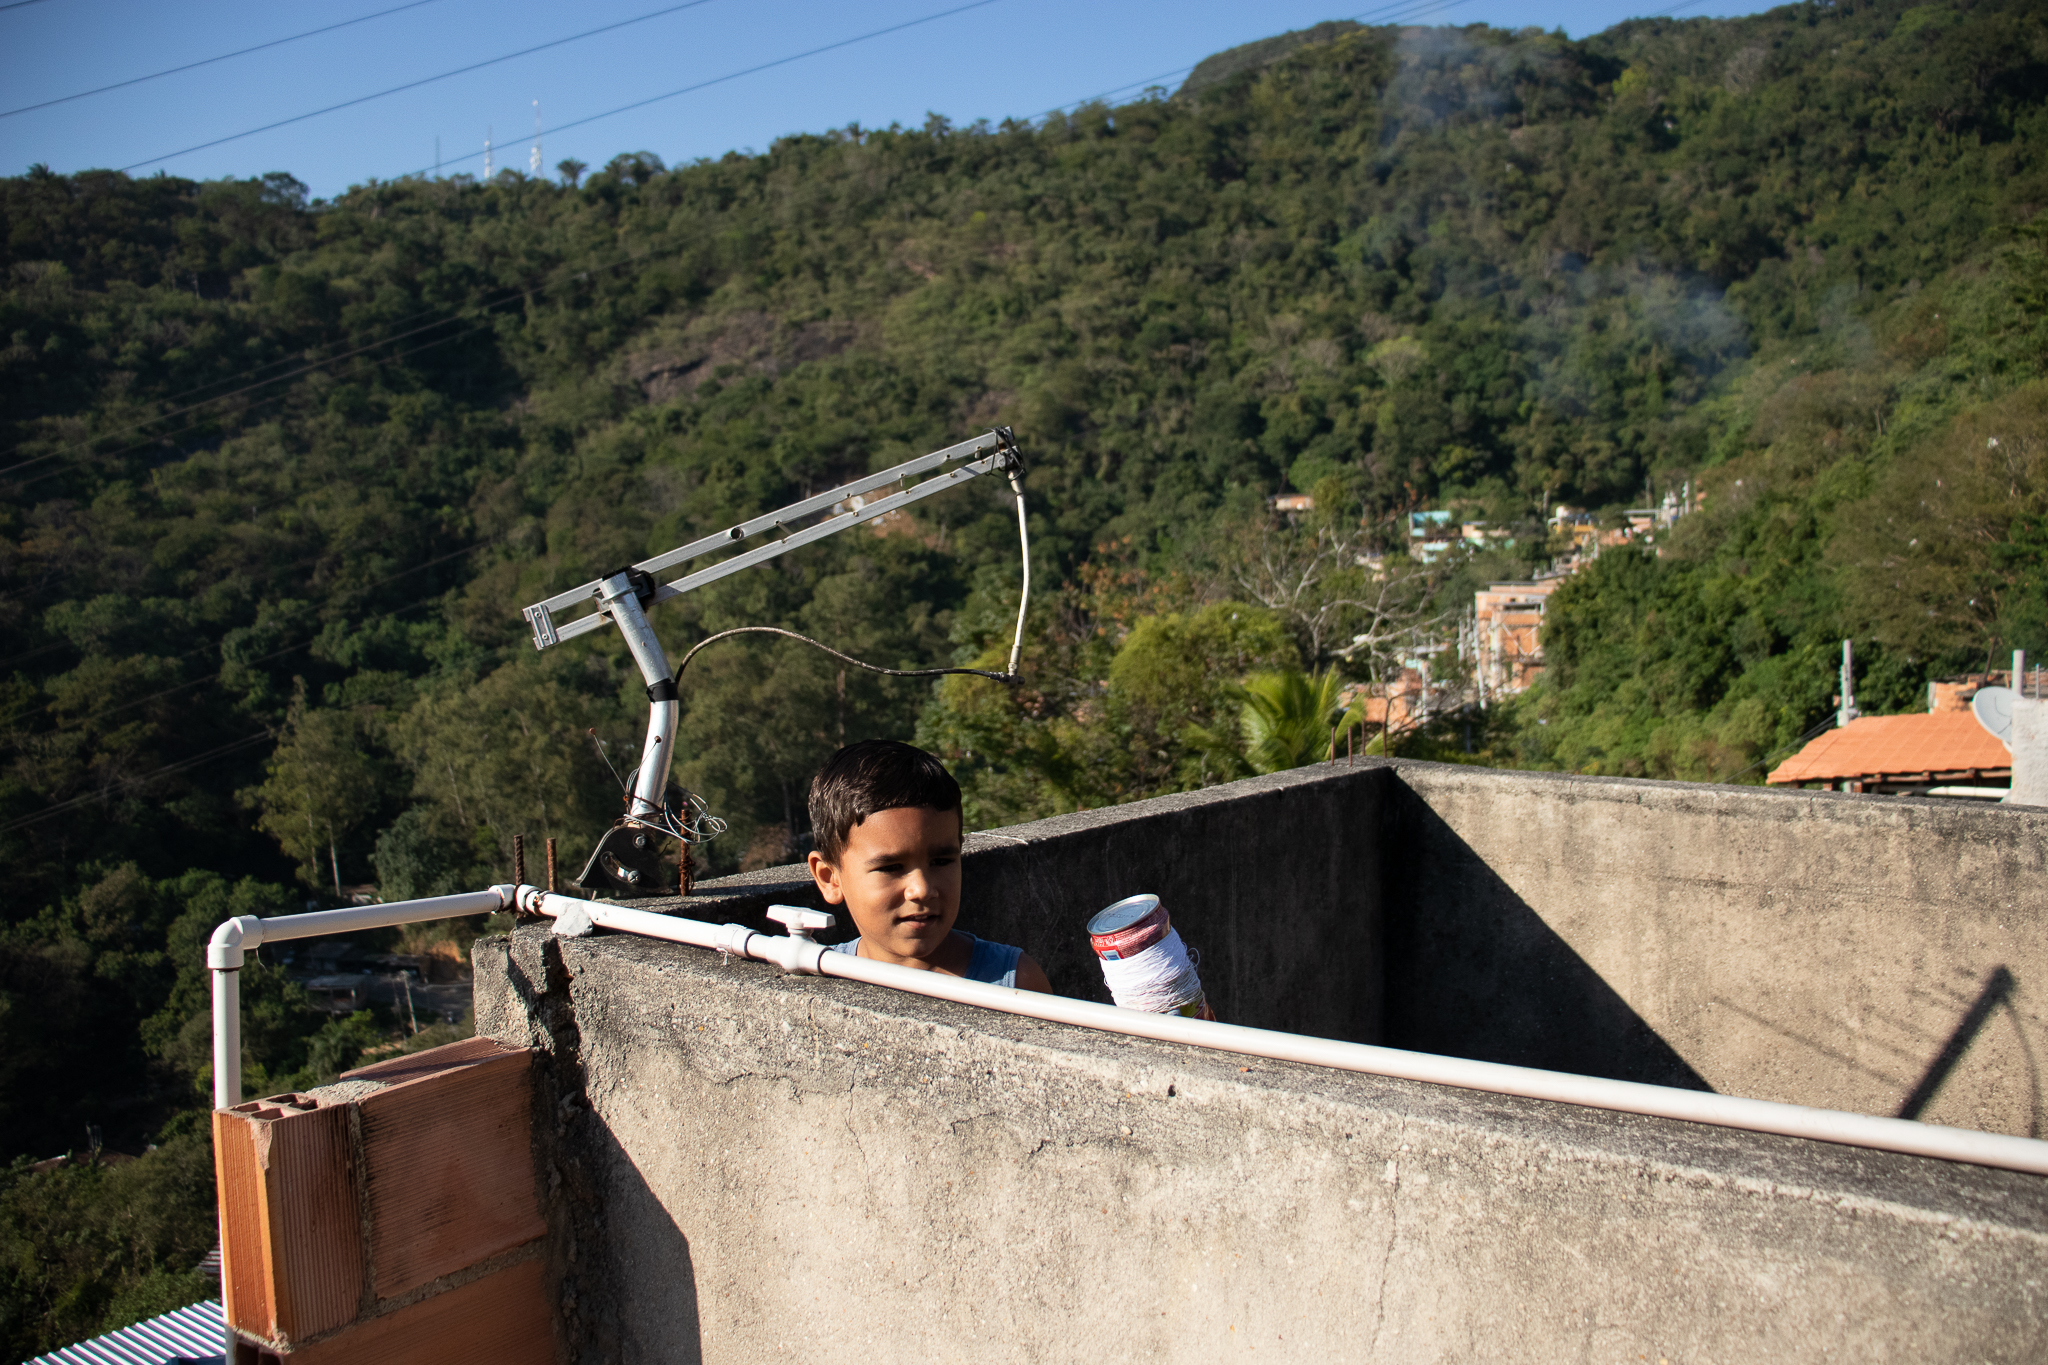 Child watching the Morro do Turano Kite Festival from a roof terrace. Photo: João Fernando